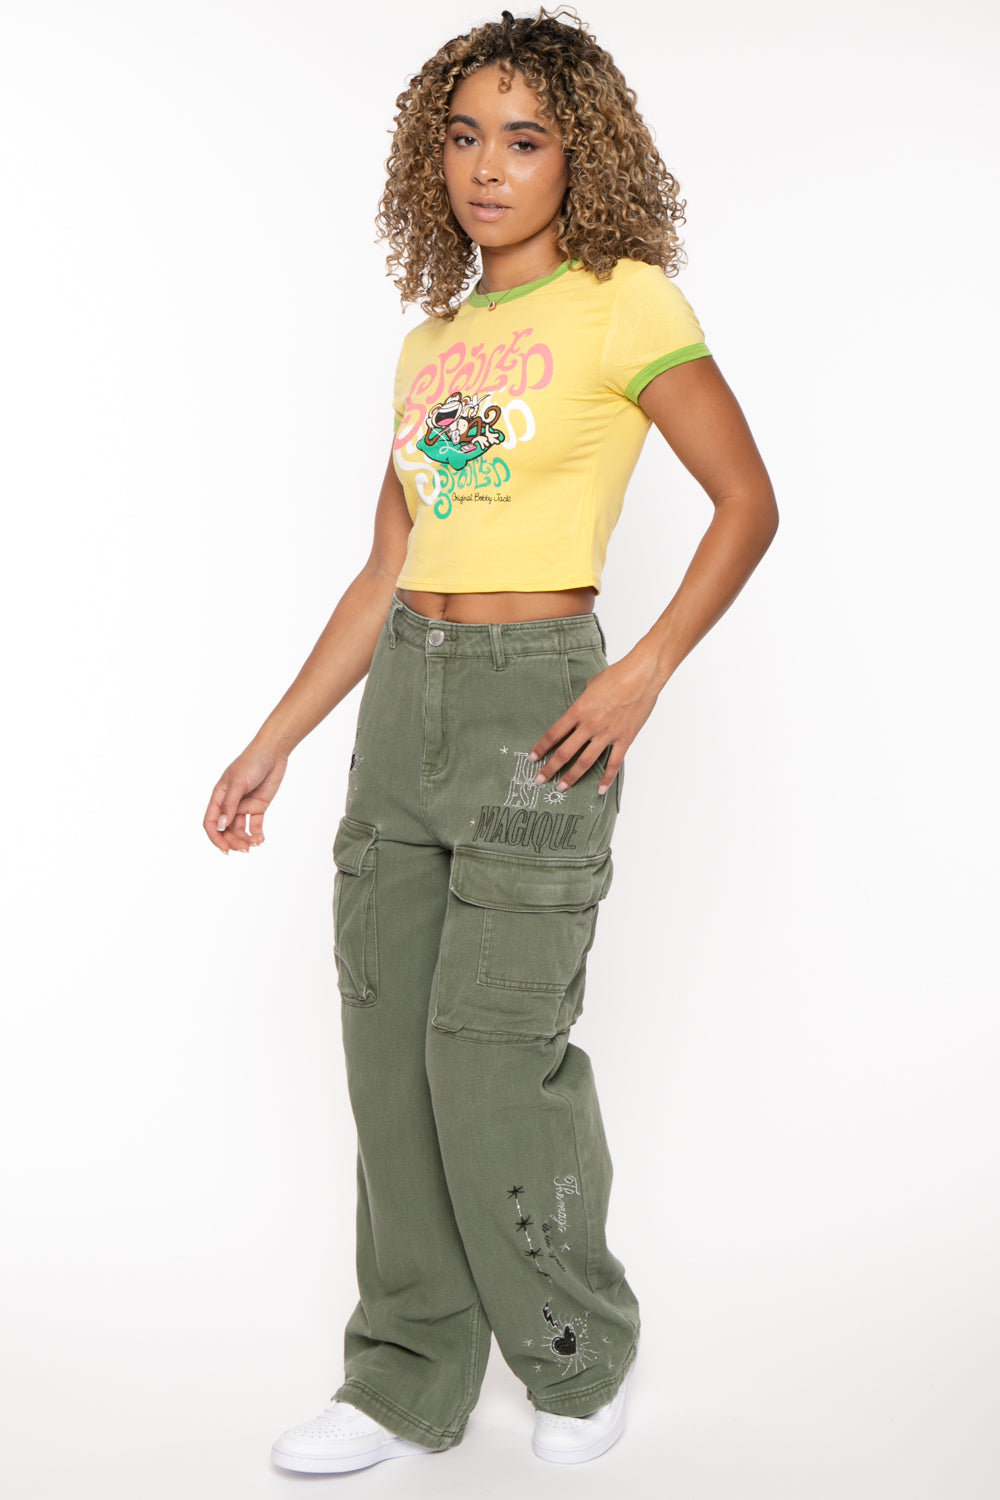 Spoiled - Bobby Jack Crop Ringer Top - Yellow